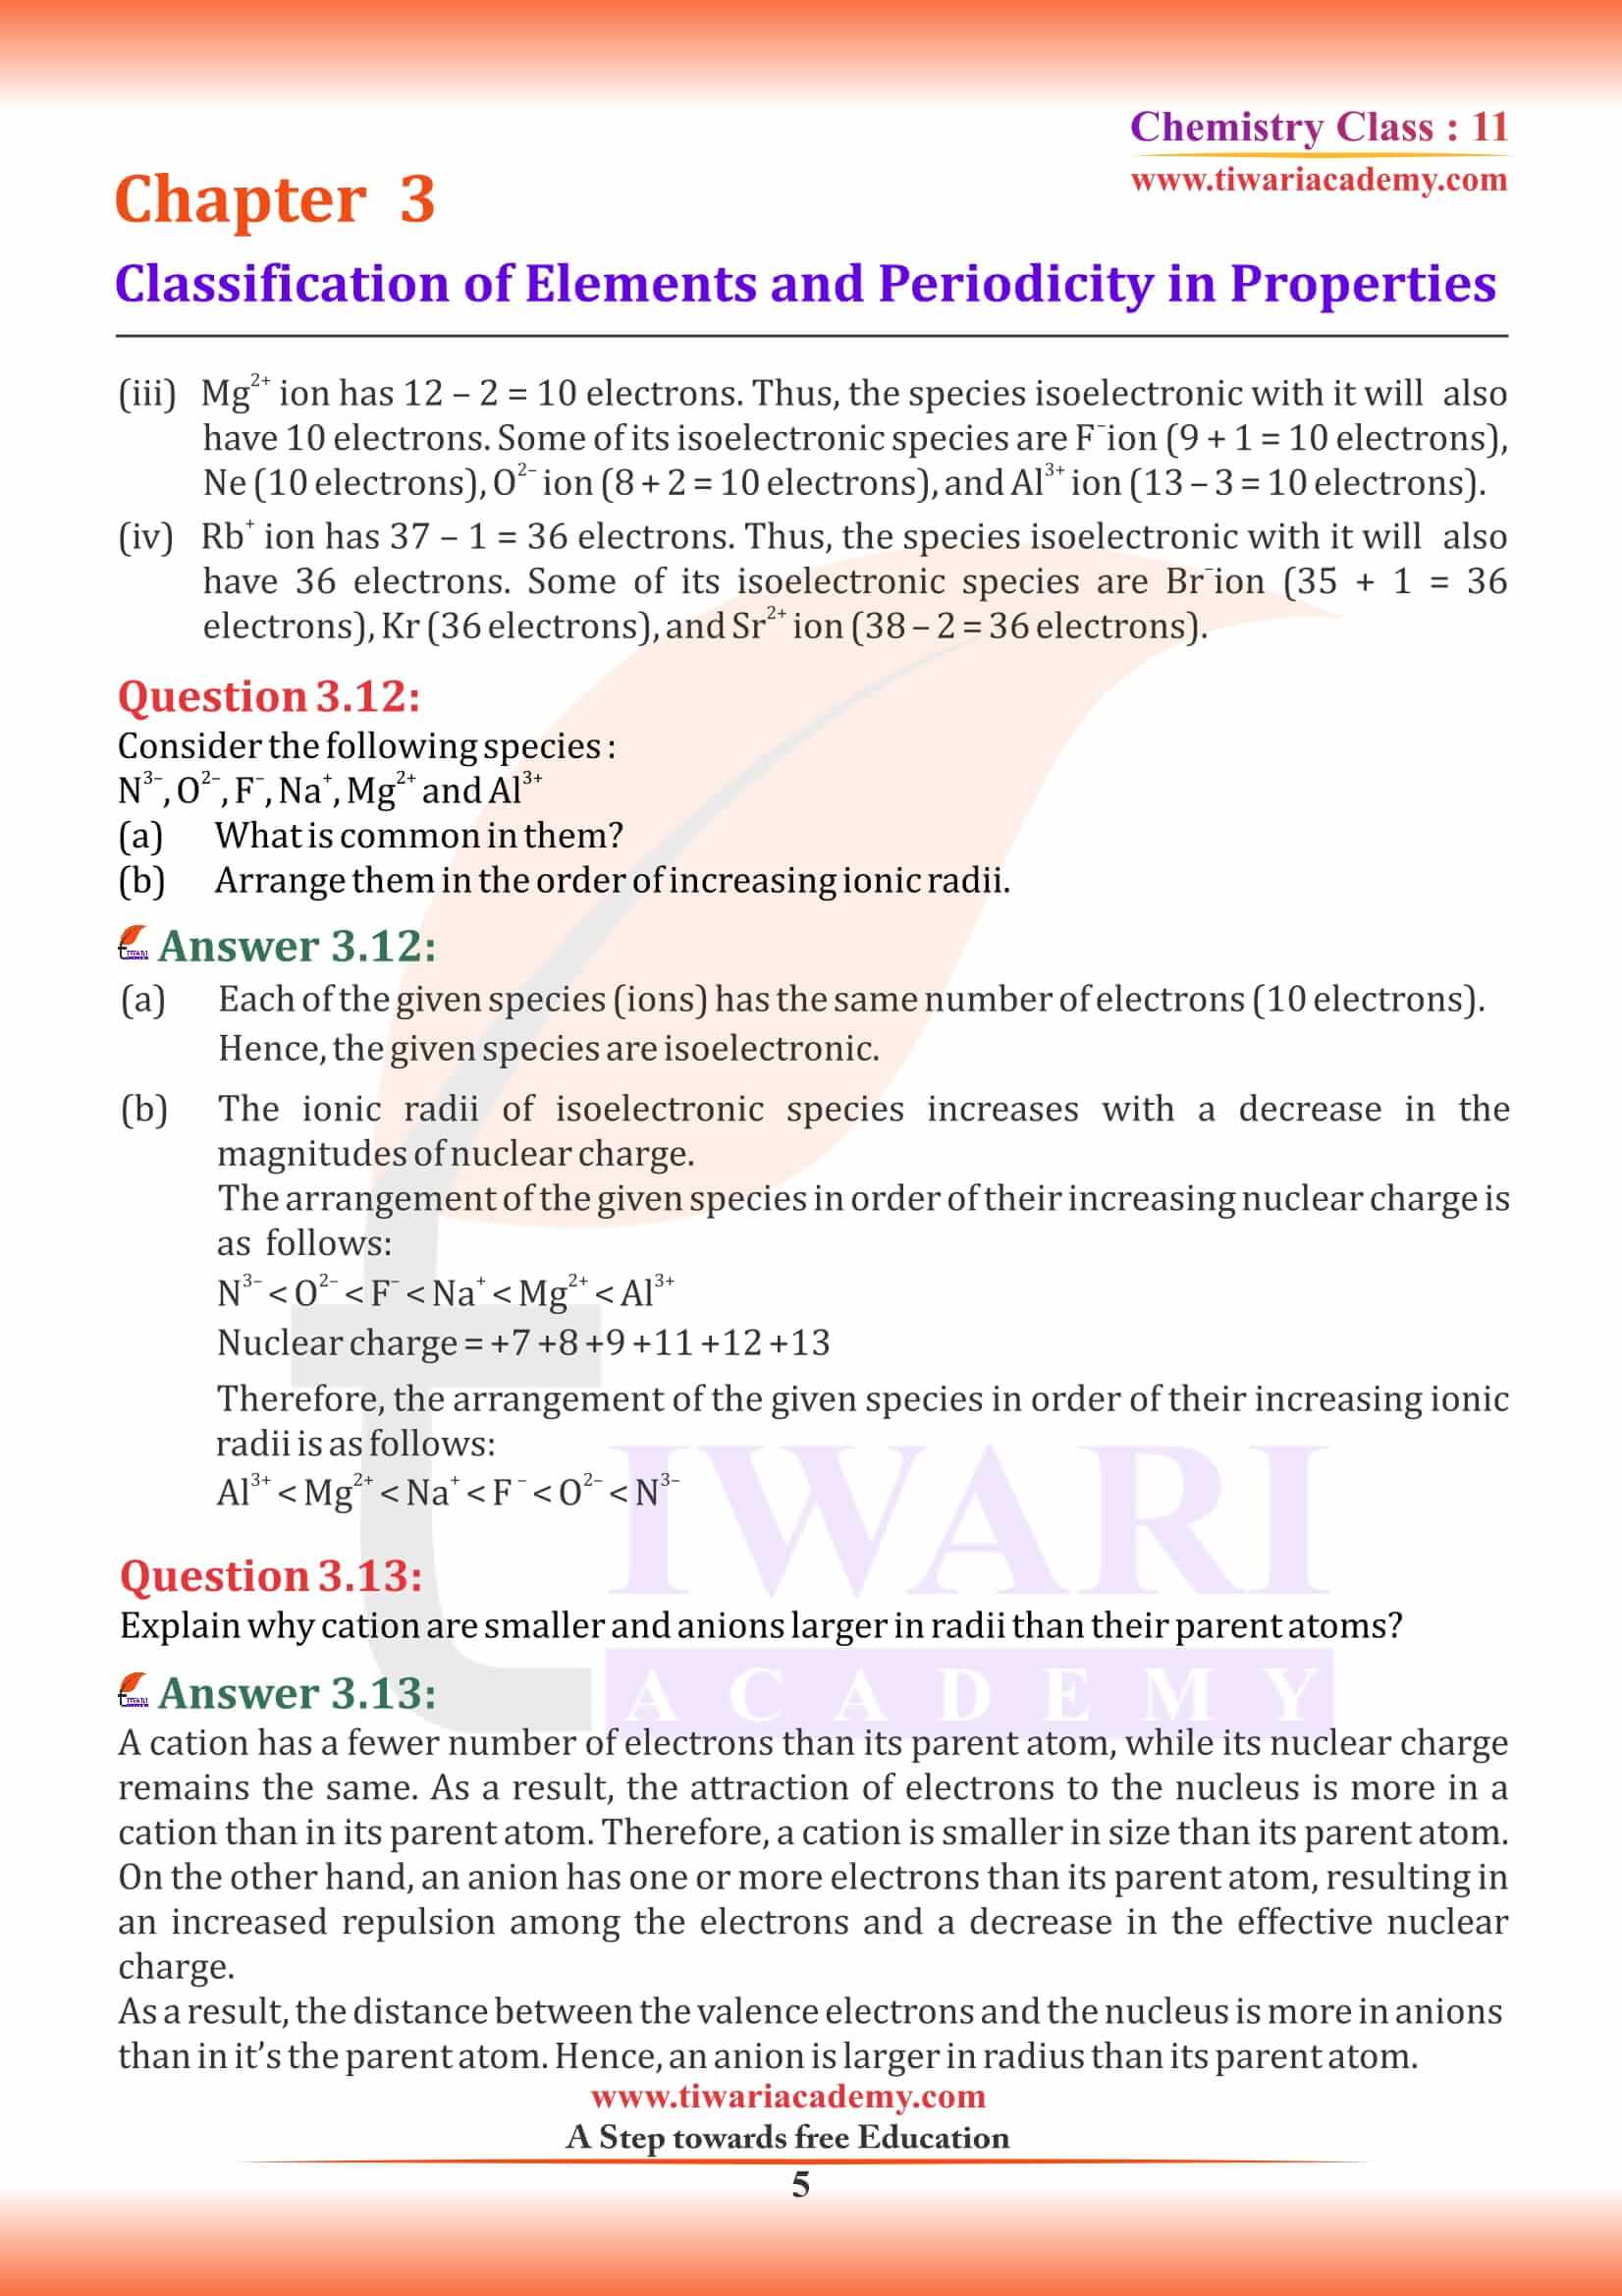 NCERT Solutions for Class 11 Chemistry Chapter 3 question answers